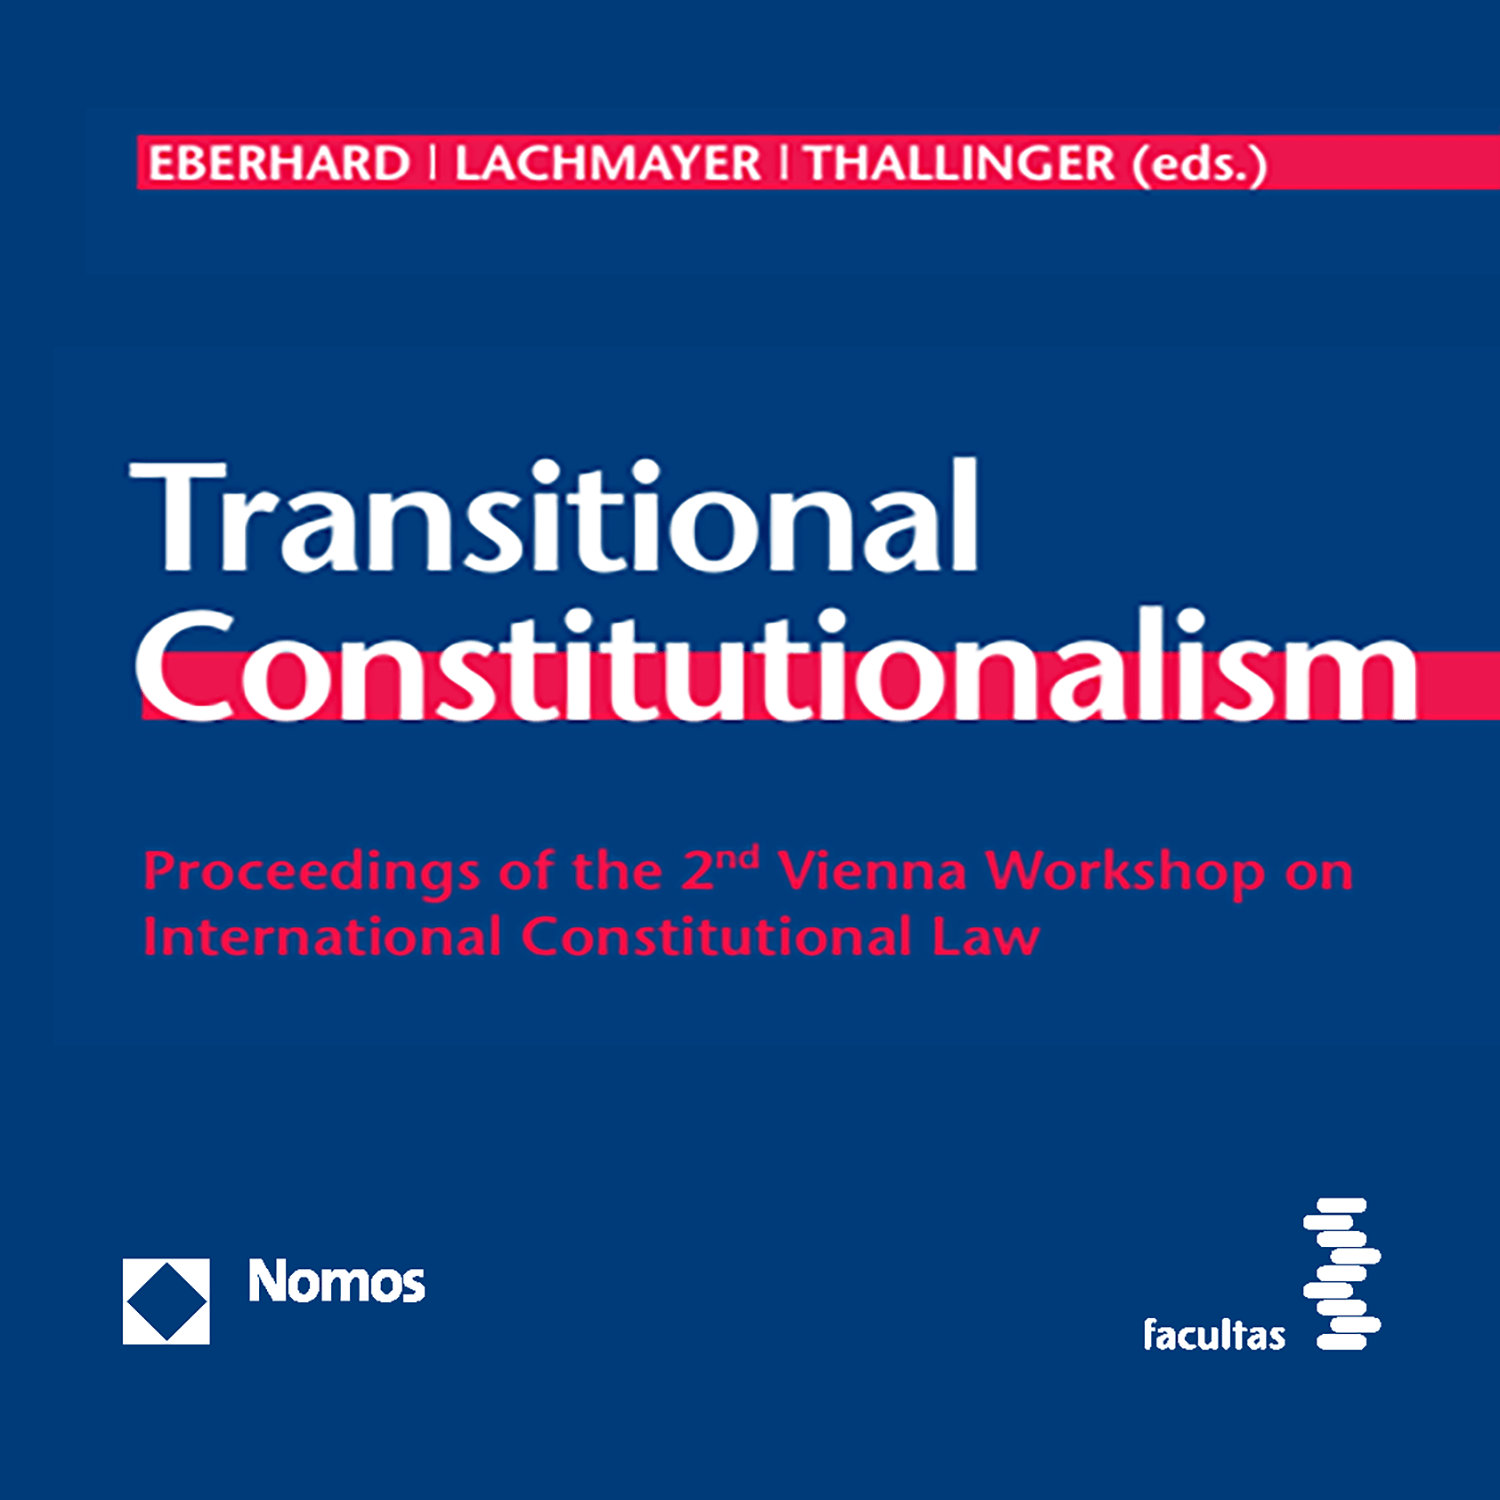 Band 01: Transitional Constitutionalism